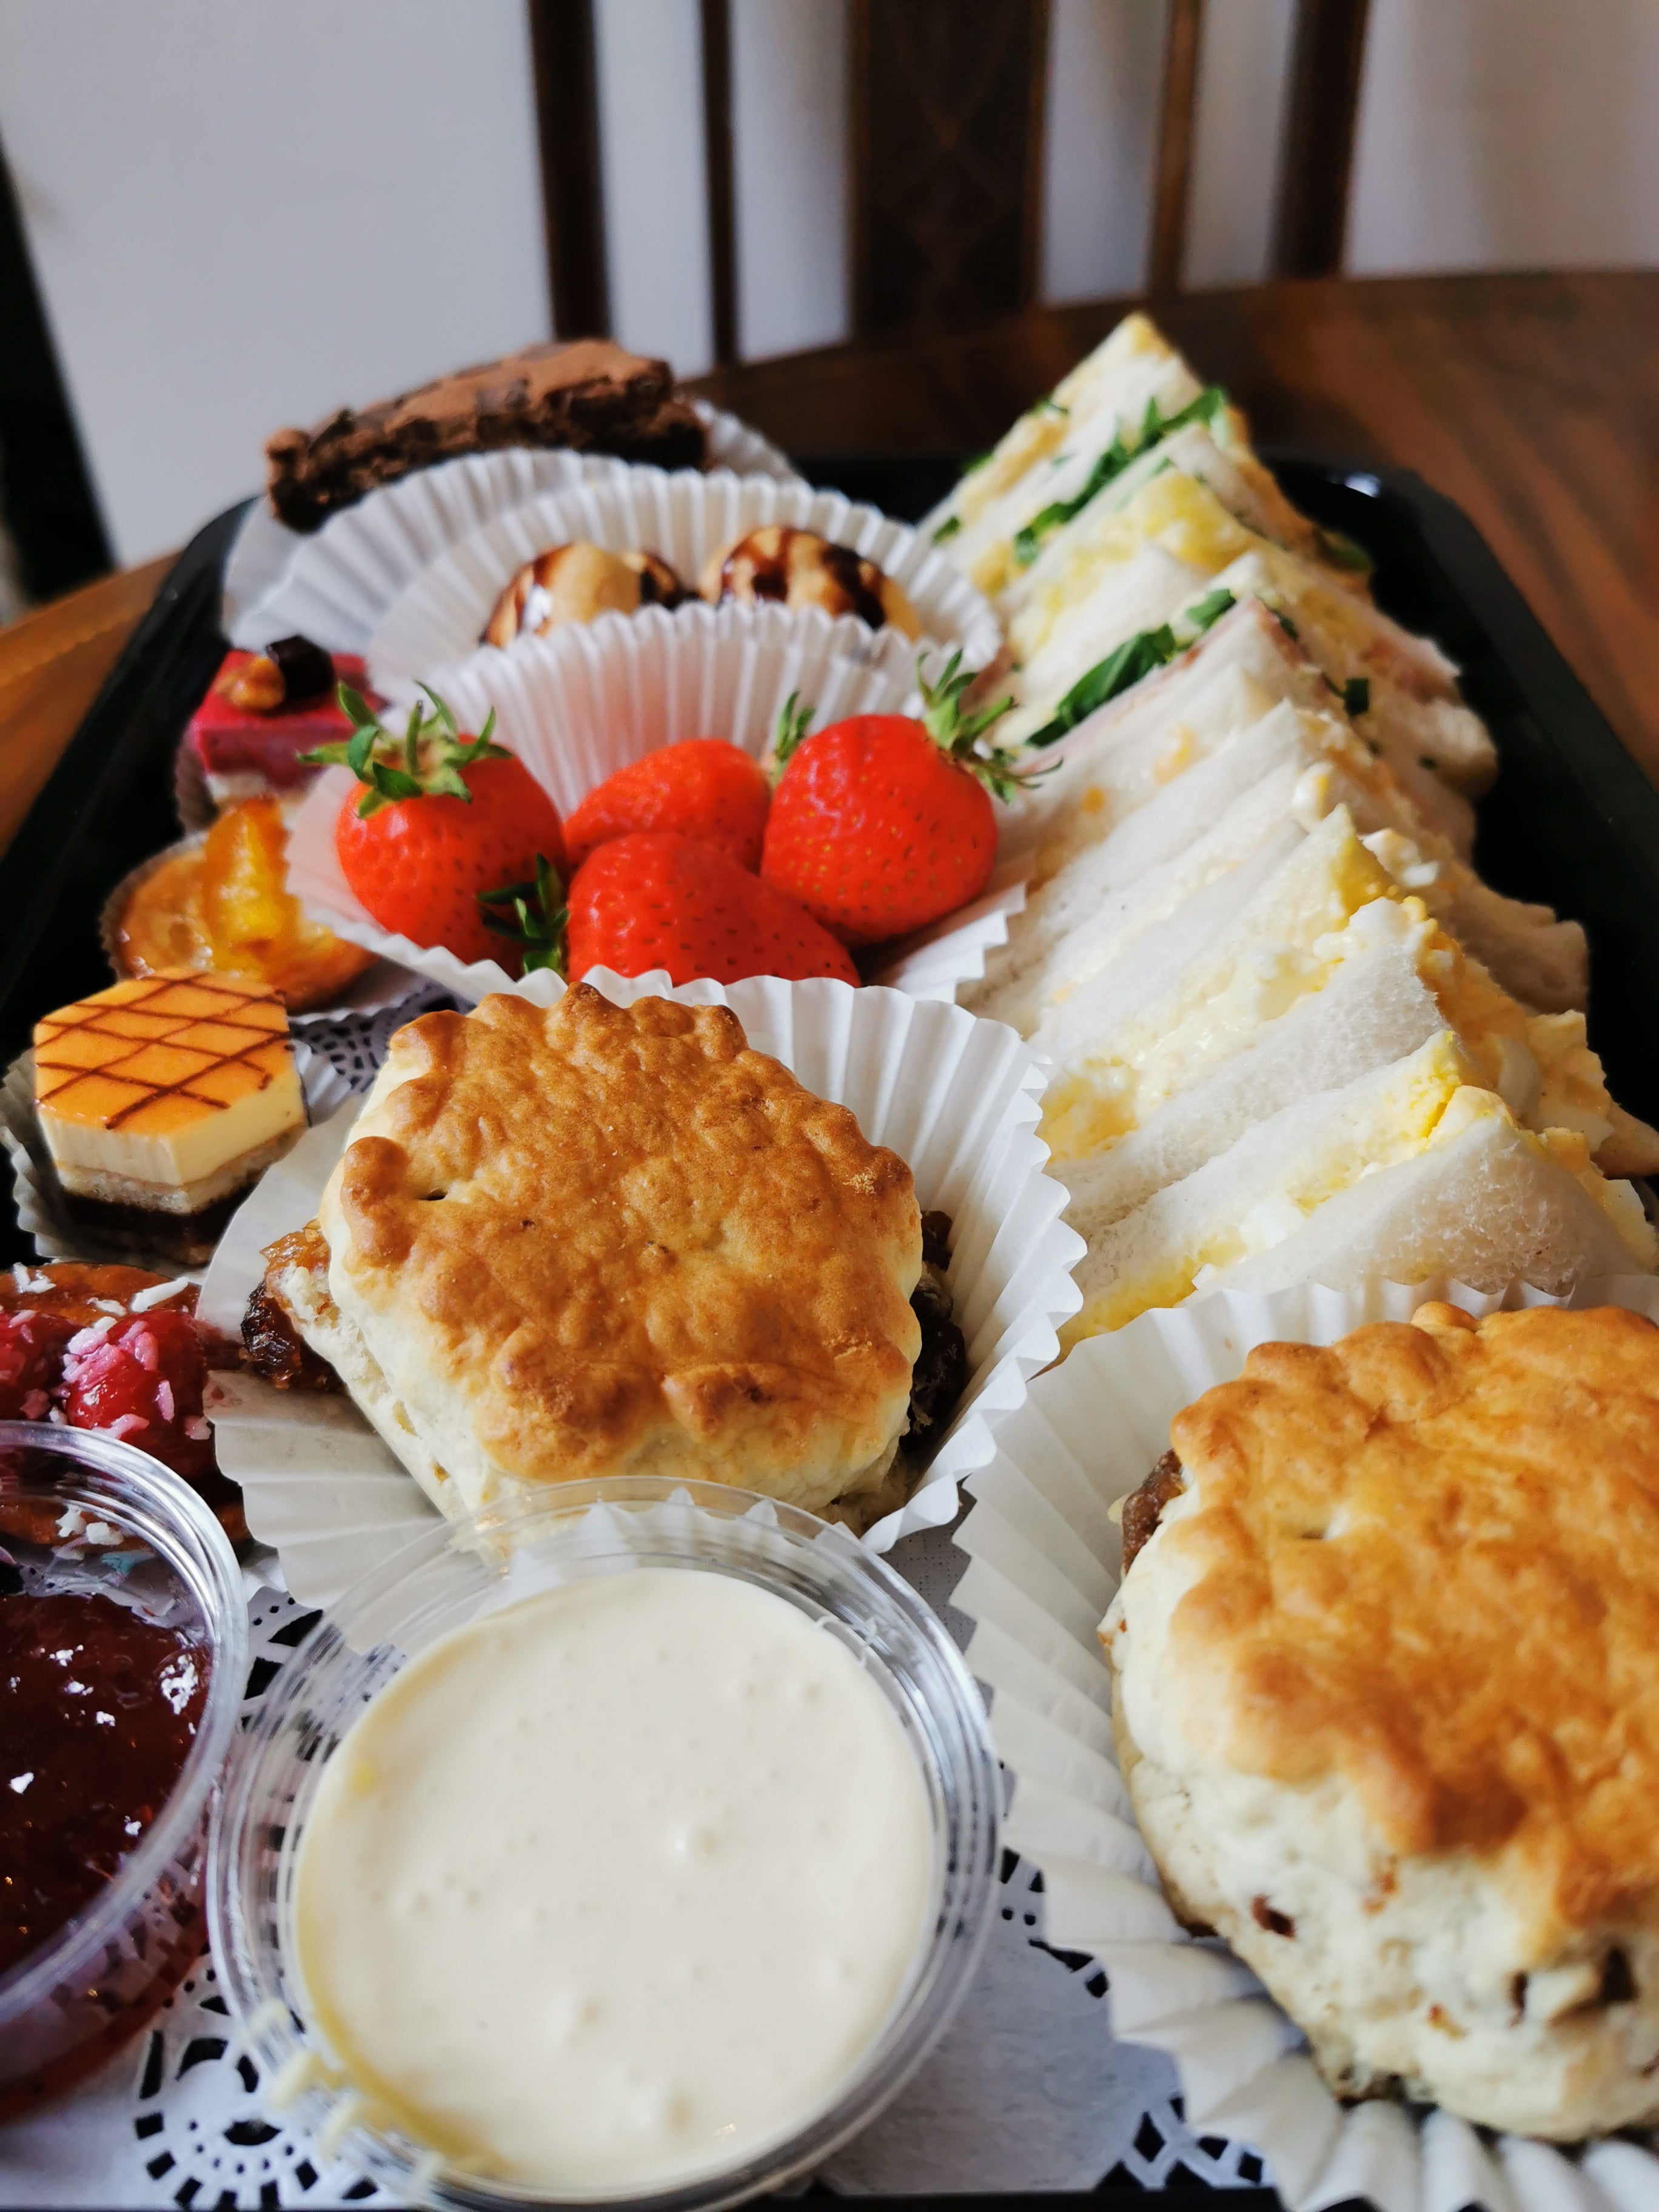 Afternoon Tea with Prosecco for 4 people